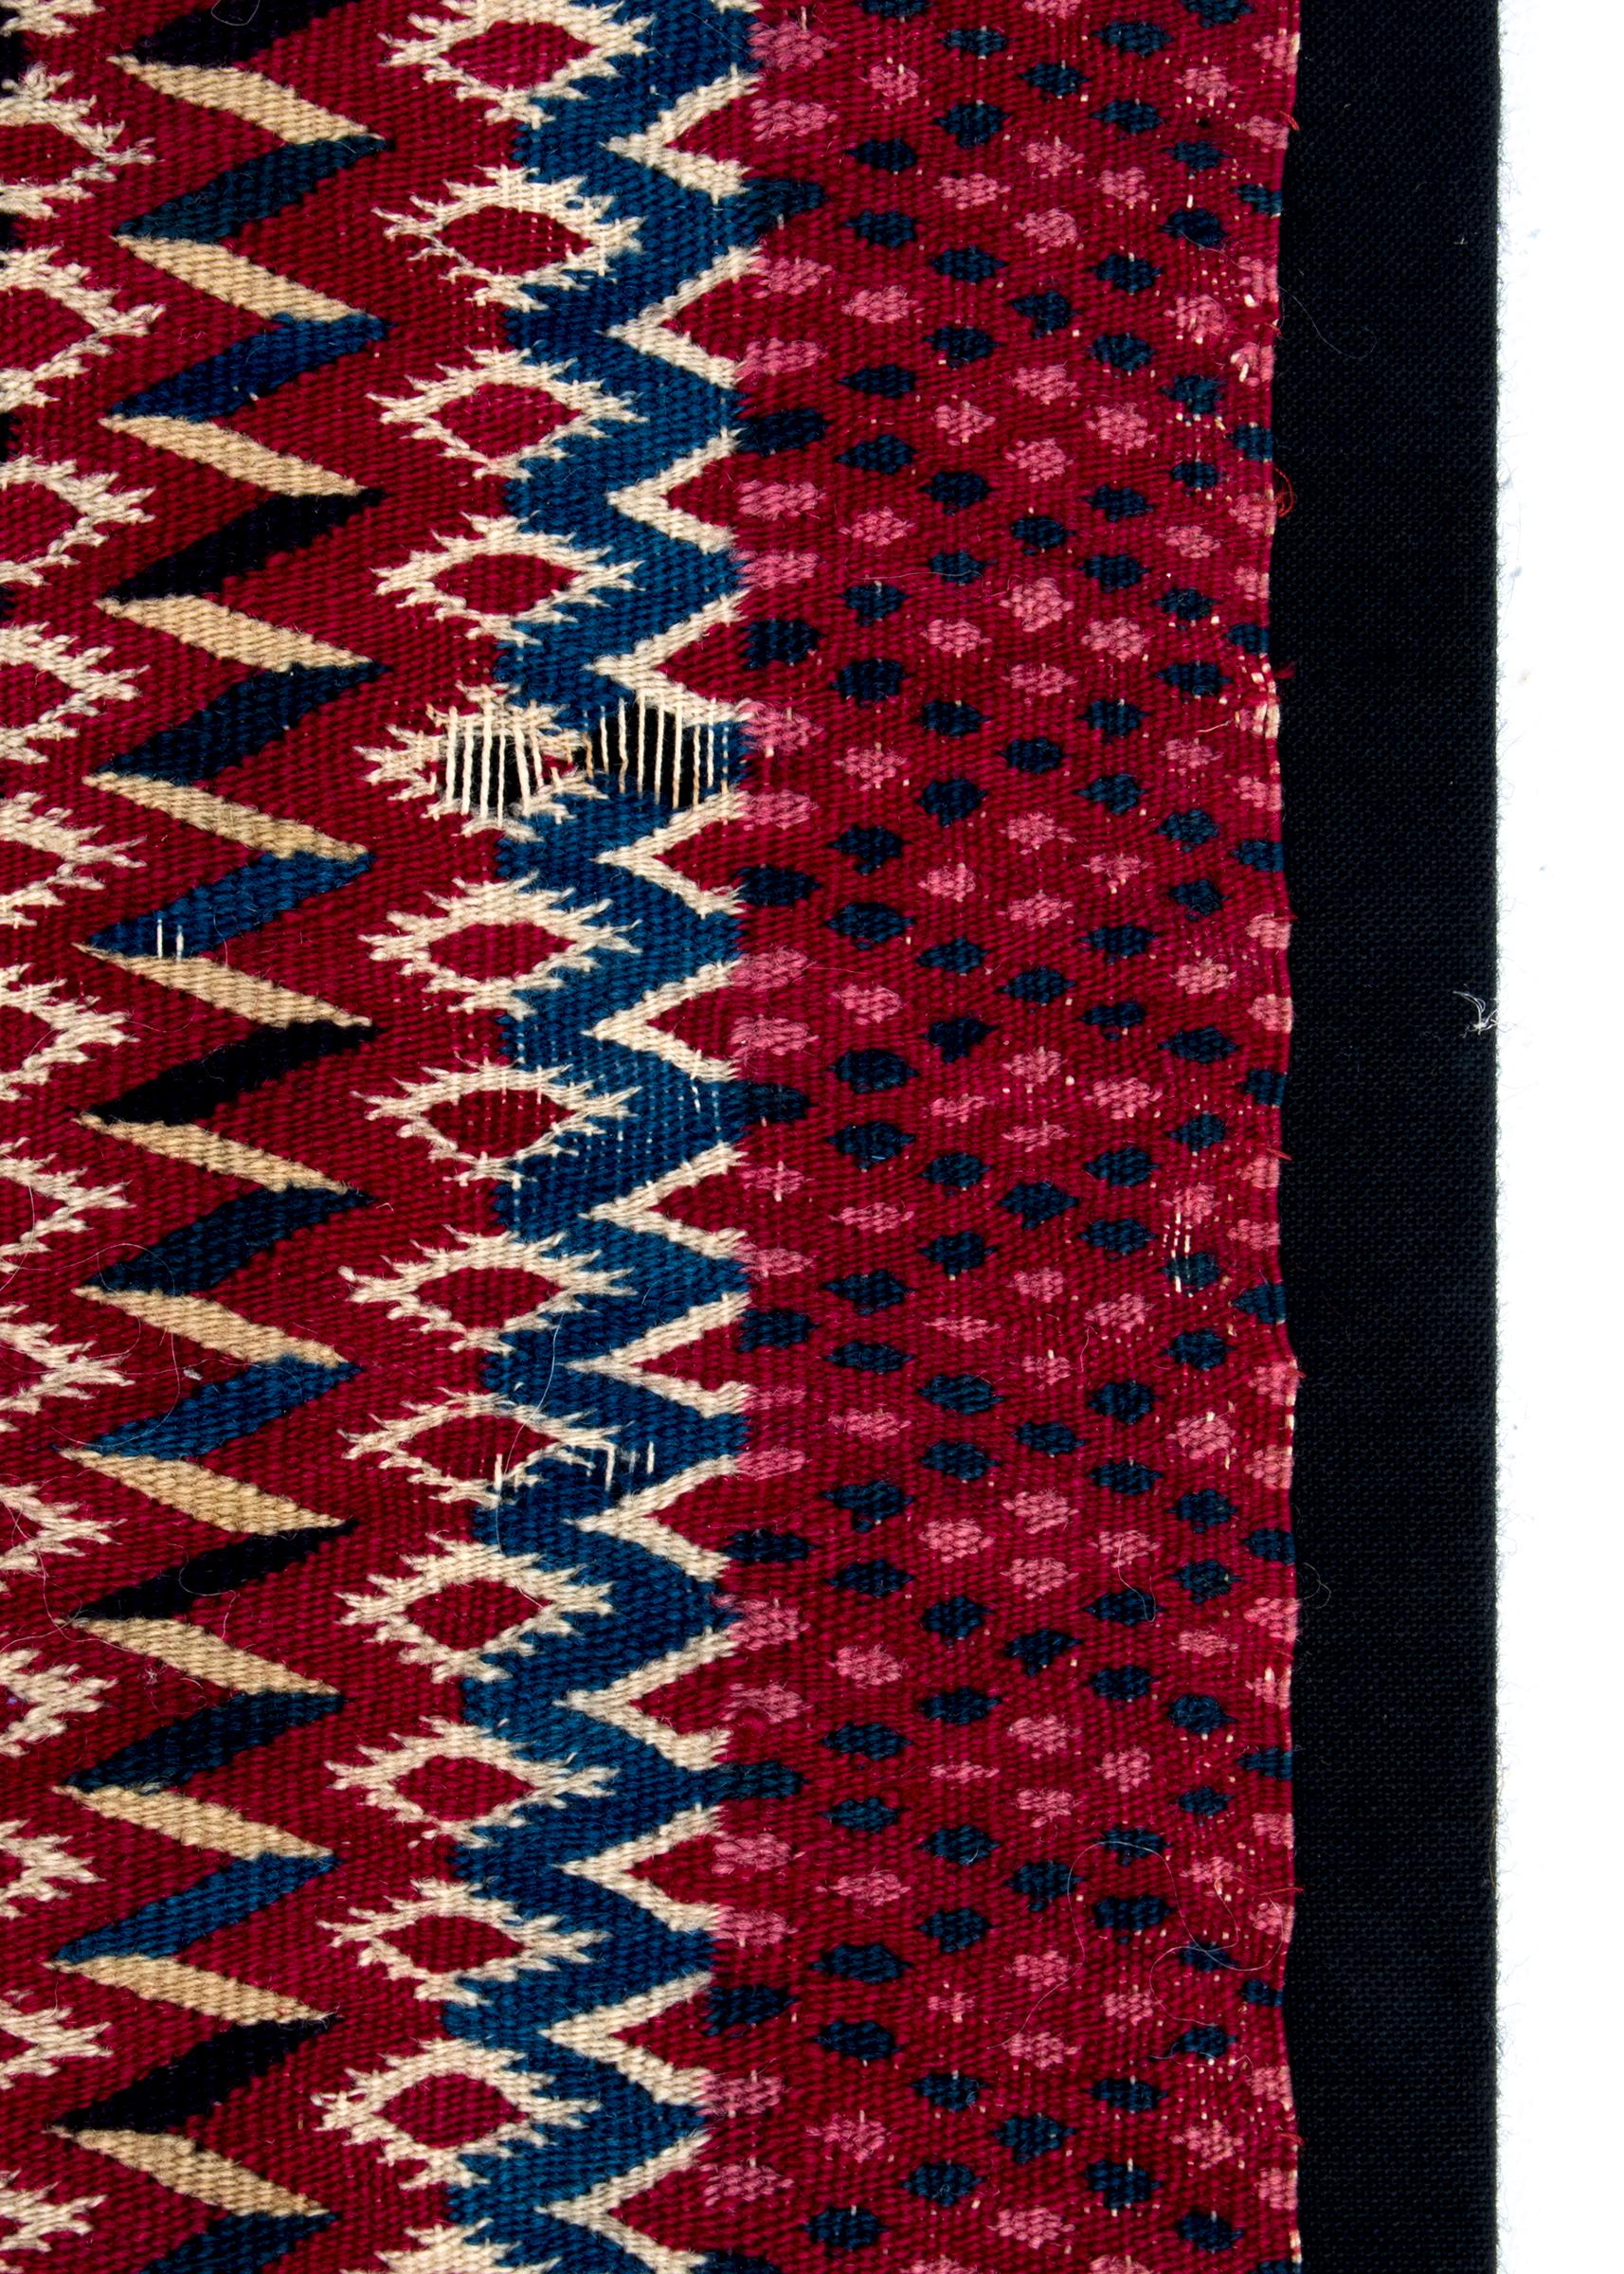 Dyed Antique 1850s Mesoamerican Saltillo Serape Transitional Mounted Textile For Sale